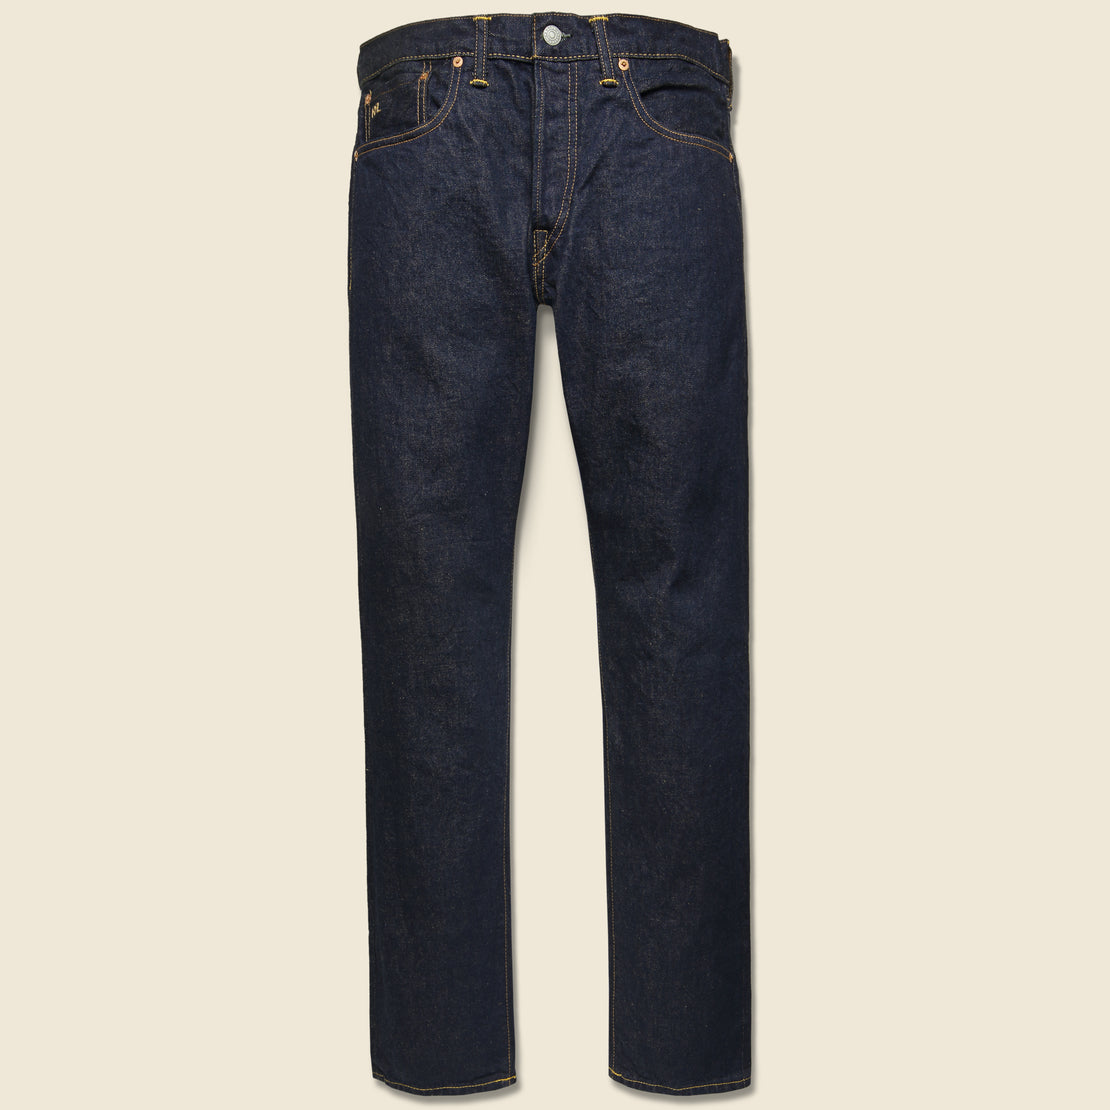 Slim Fit Jean - Once Washed